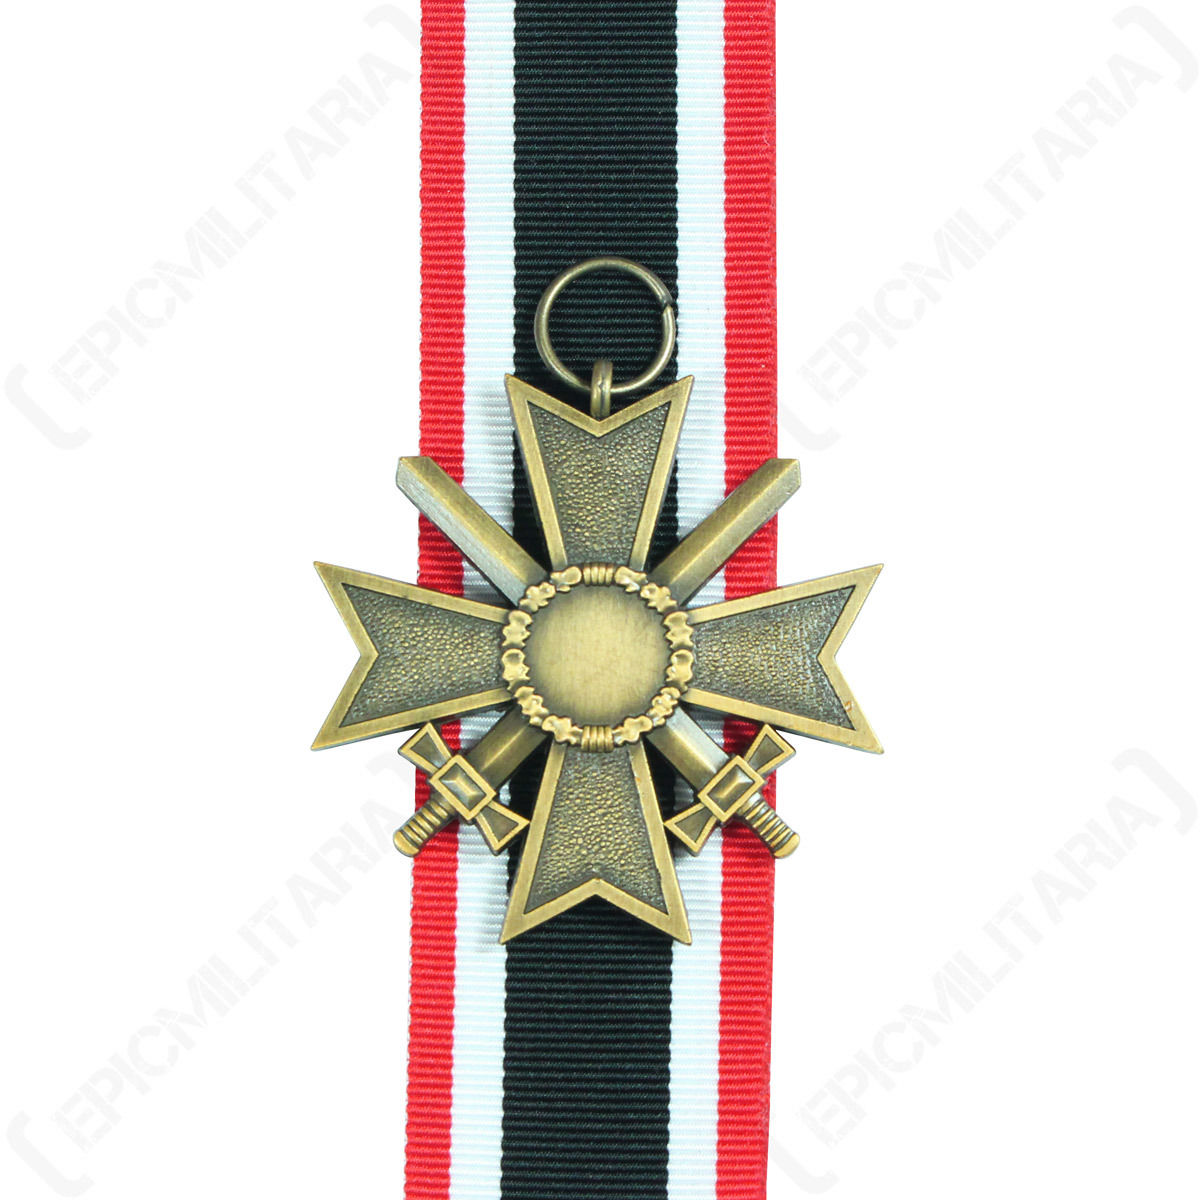 1957 WAR MERIT CROSS - 2ND CLASS - Repro WW2 With Ribbon German Military Army